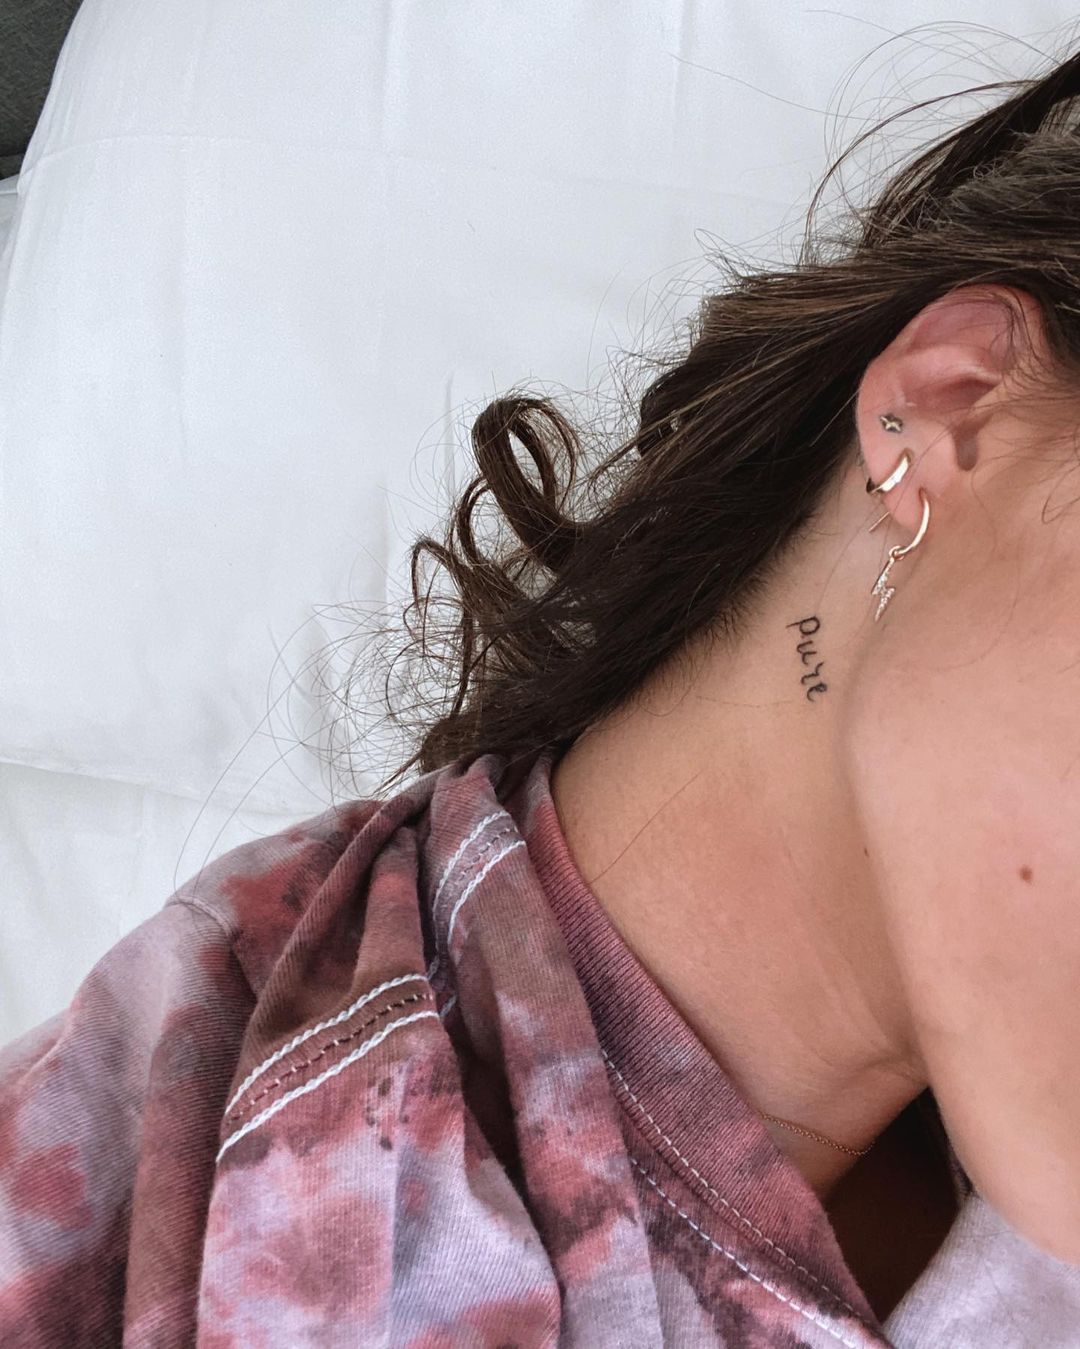 Nessa Barrett showed off her "pure" tattoo she got on the back of her neck to her followers on Instagram